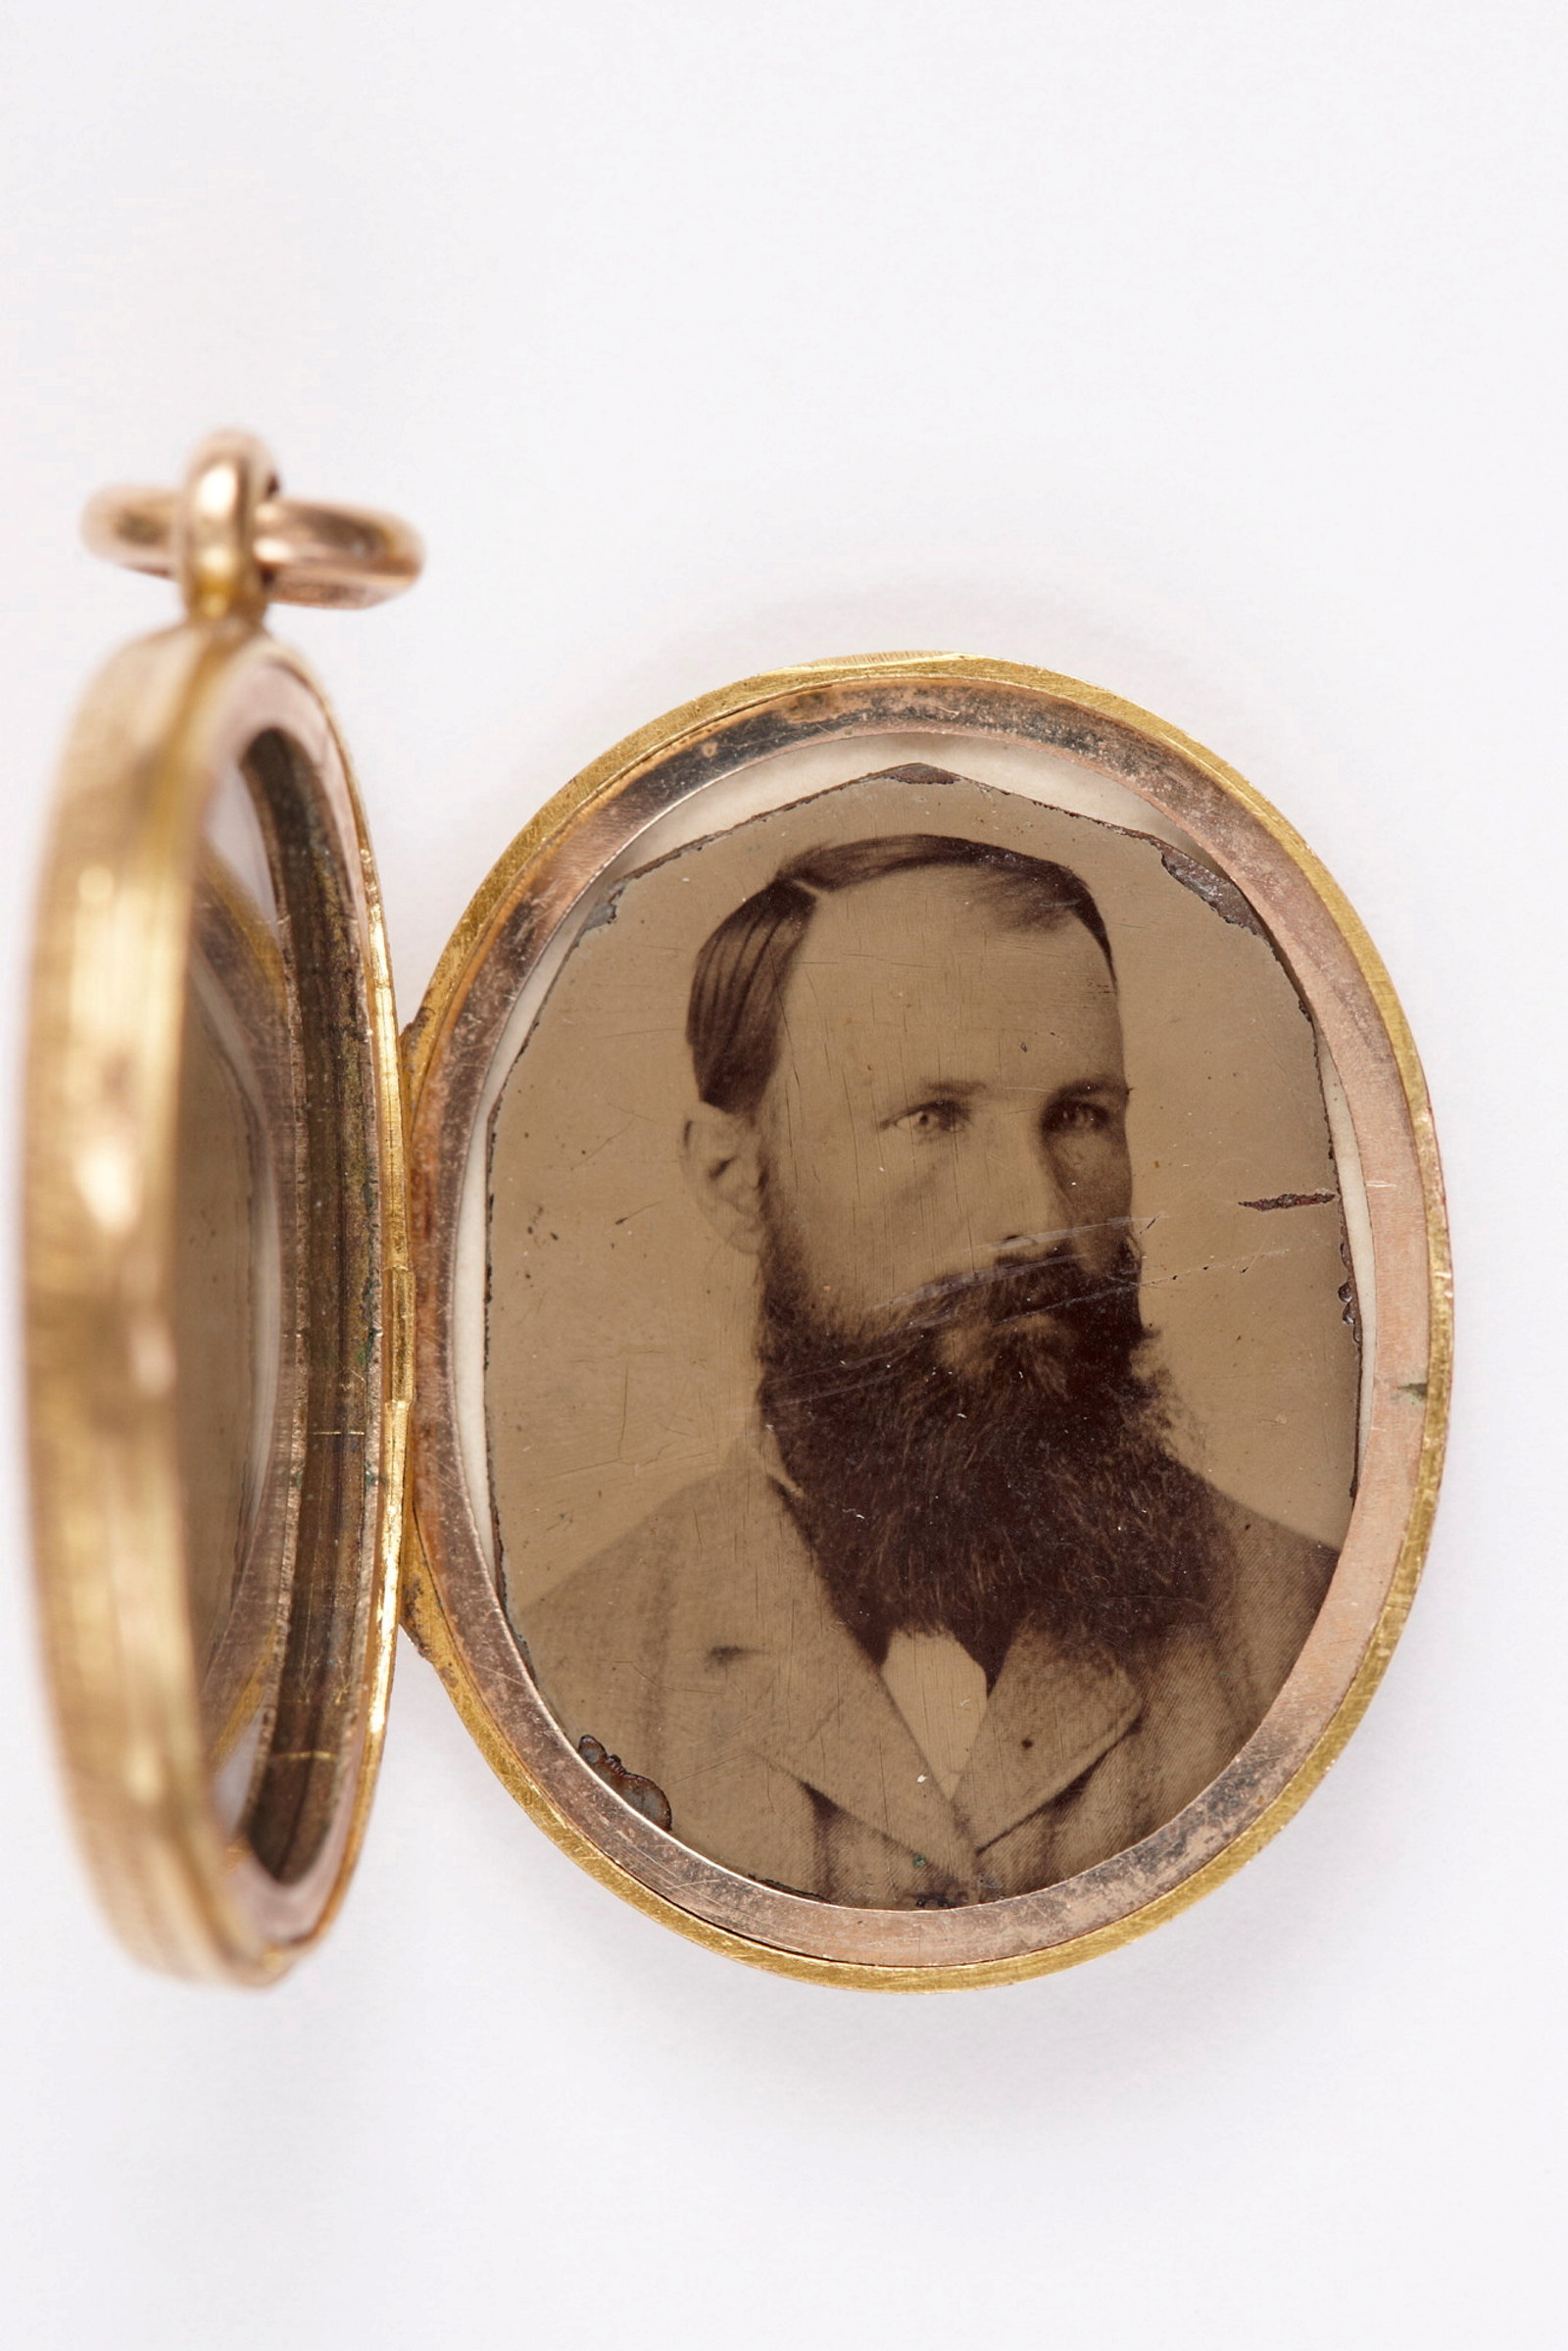 Handcoloured portrait tintype photograph of bearded man. Photograph sits within small oval gold locket, hinged at one side and attached with gold ring at top.